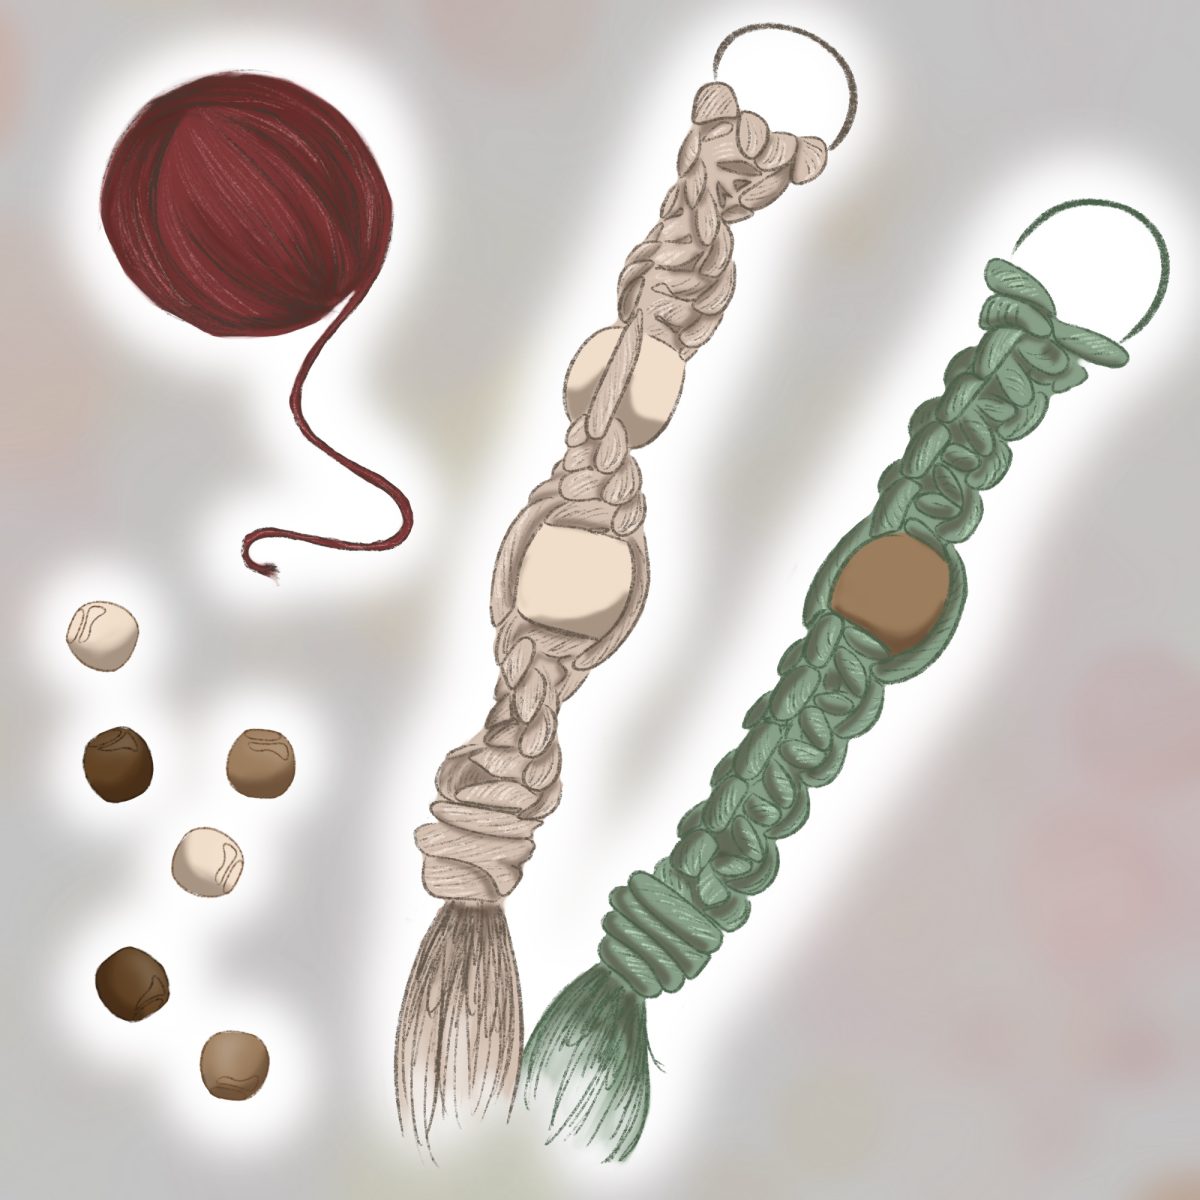 Learn how to weave macramé and connect further with WSUs Common Reading book, Braiding Sweetgrass by Robin Wall Kimmerer.